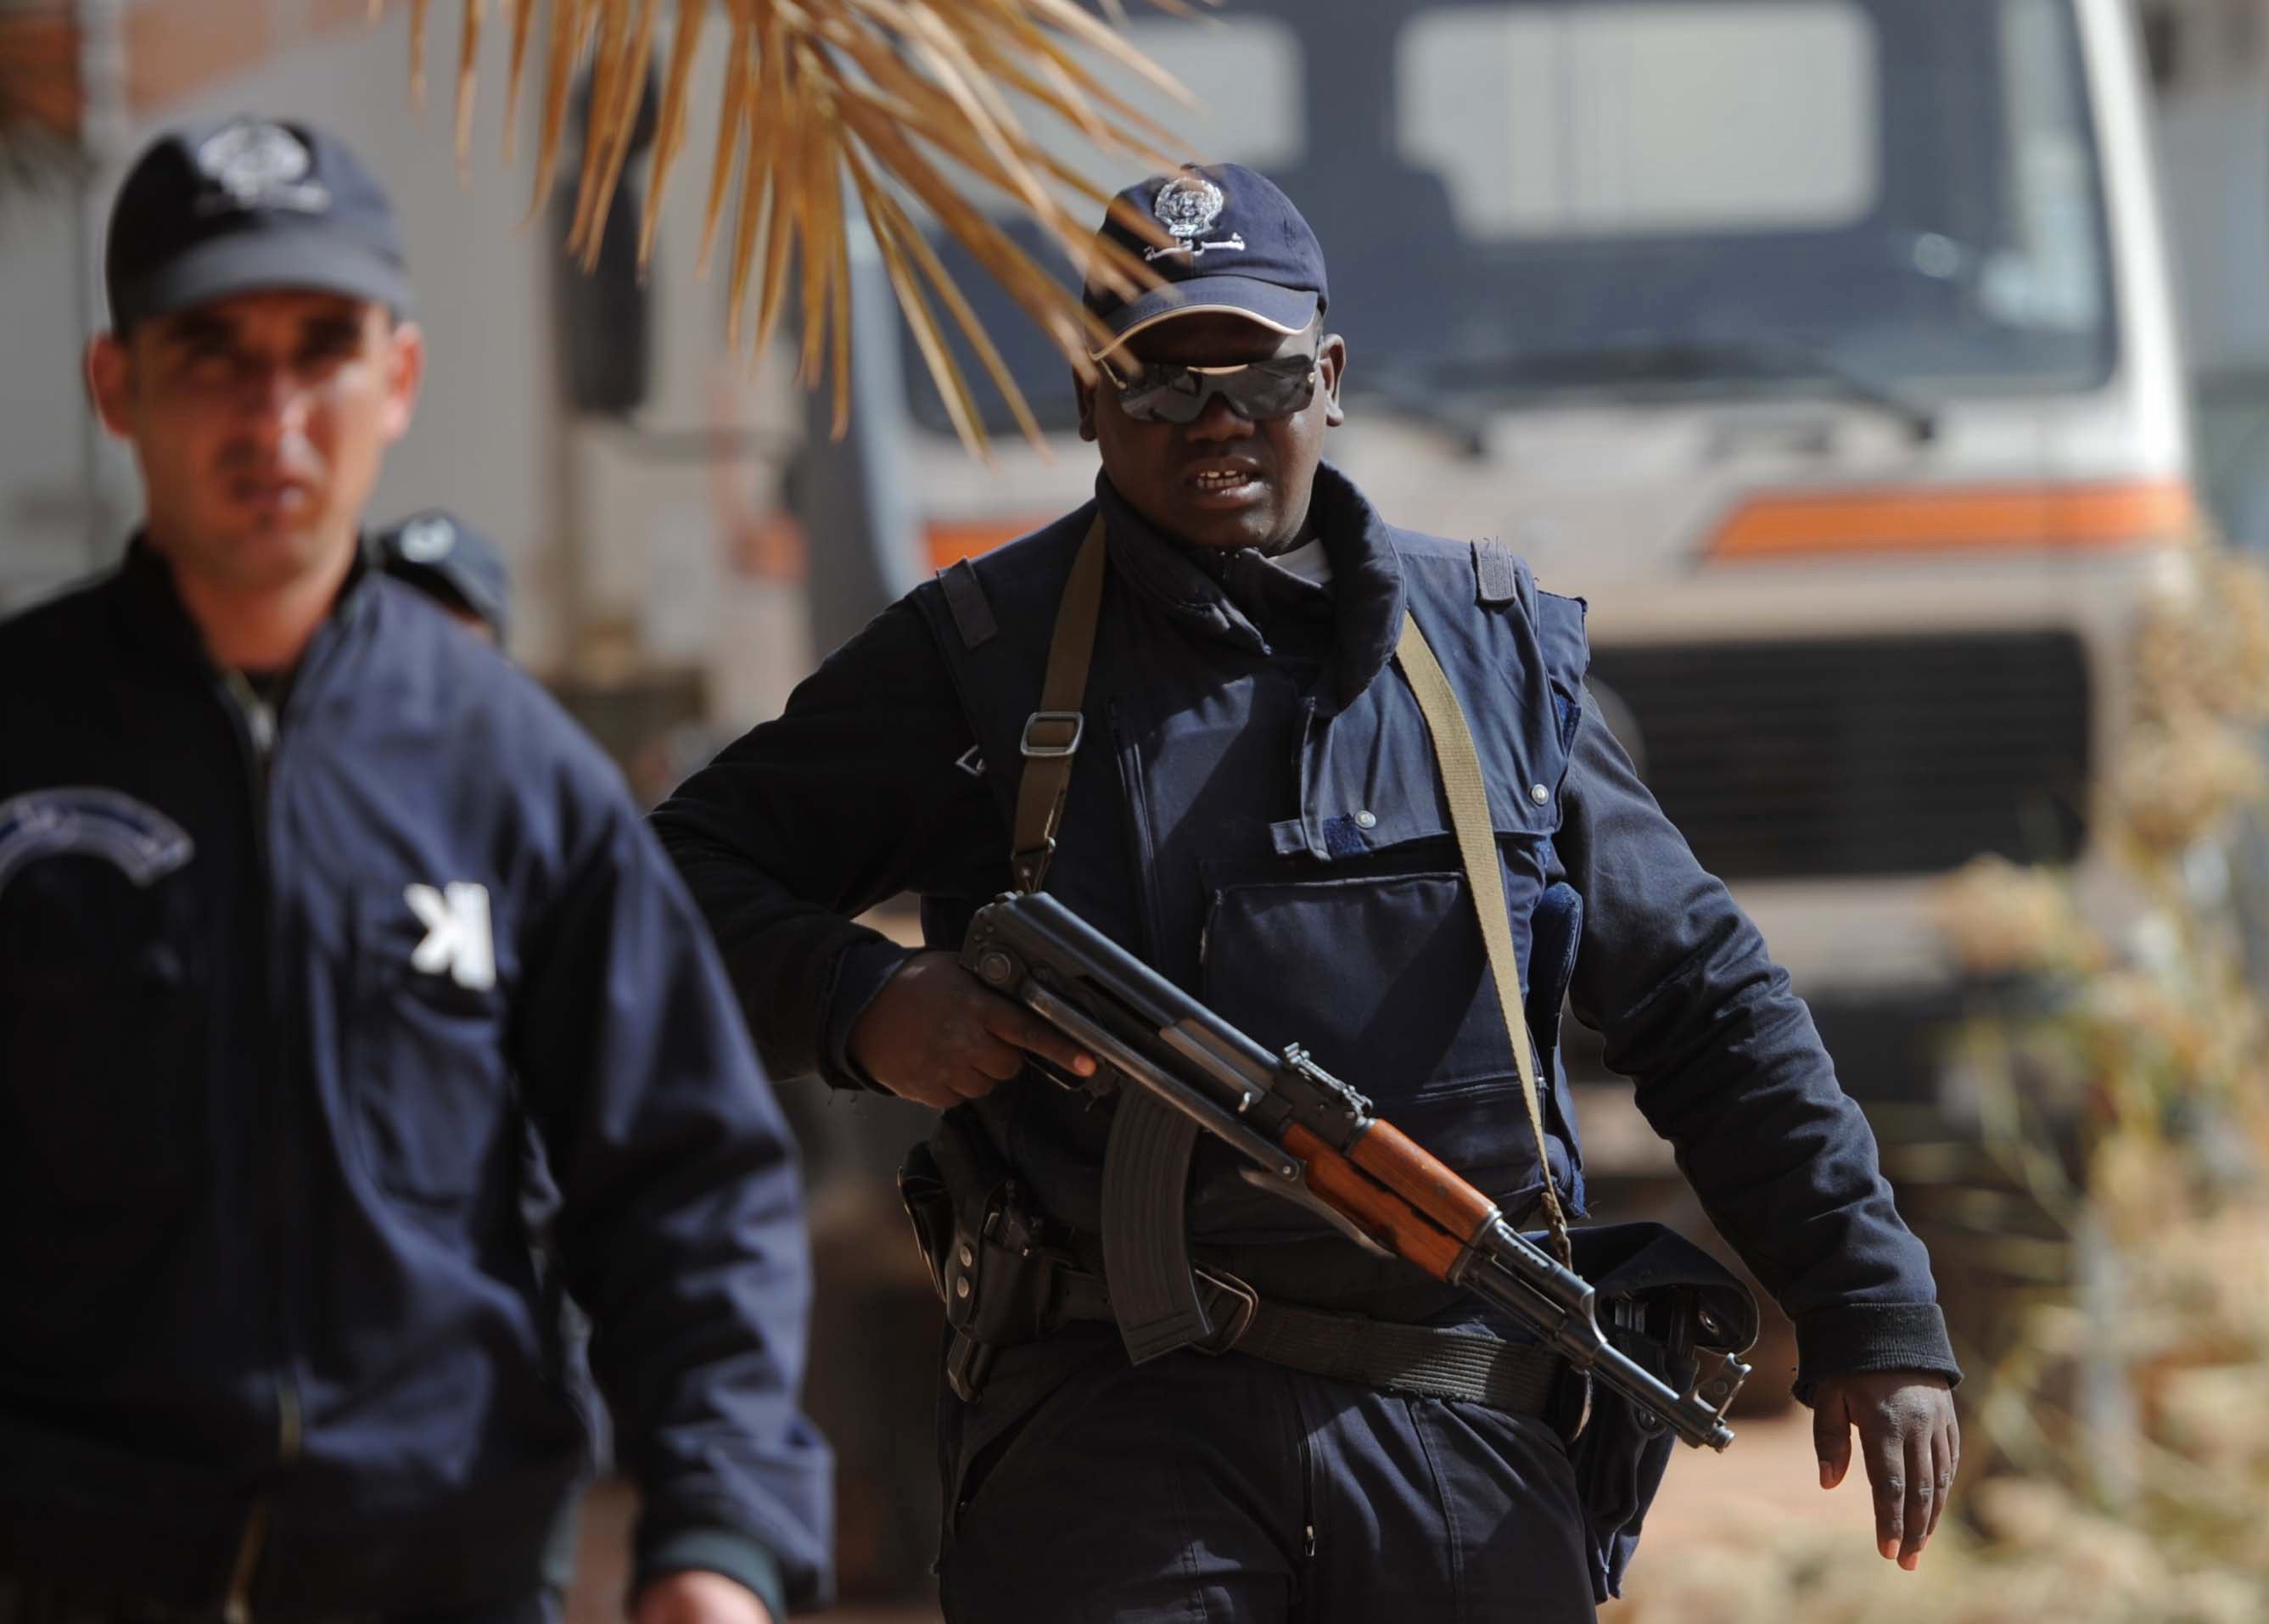 The Algerian police force is raising the status of drug trafficking as one of the country’s top security threats